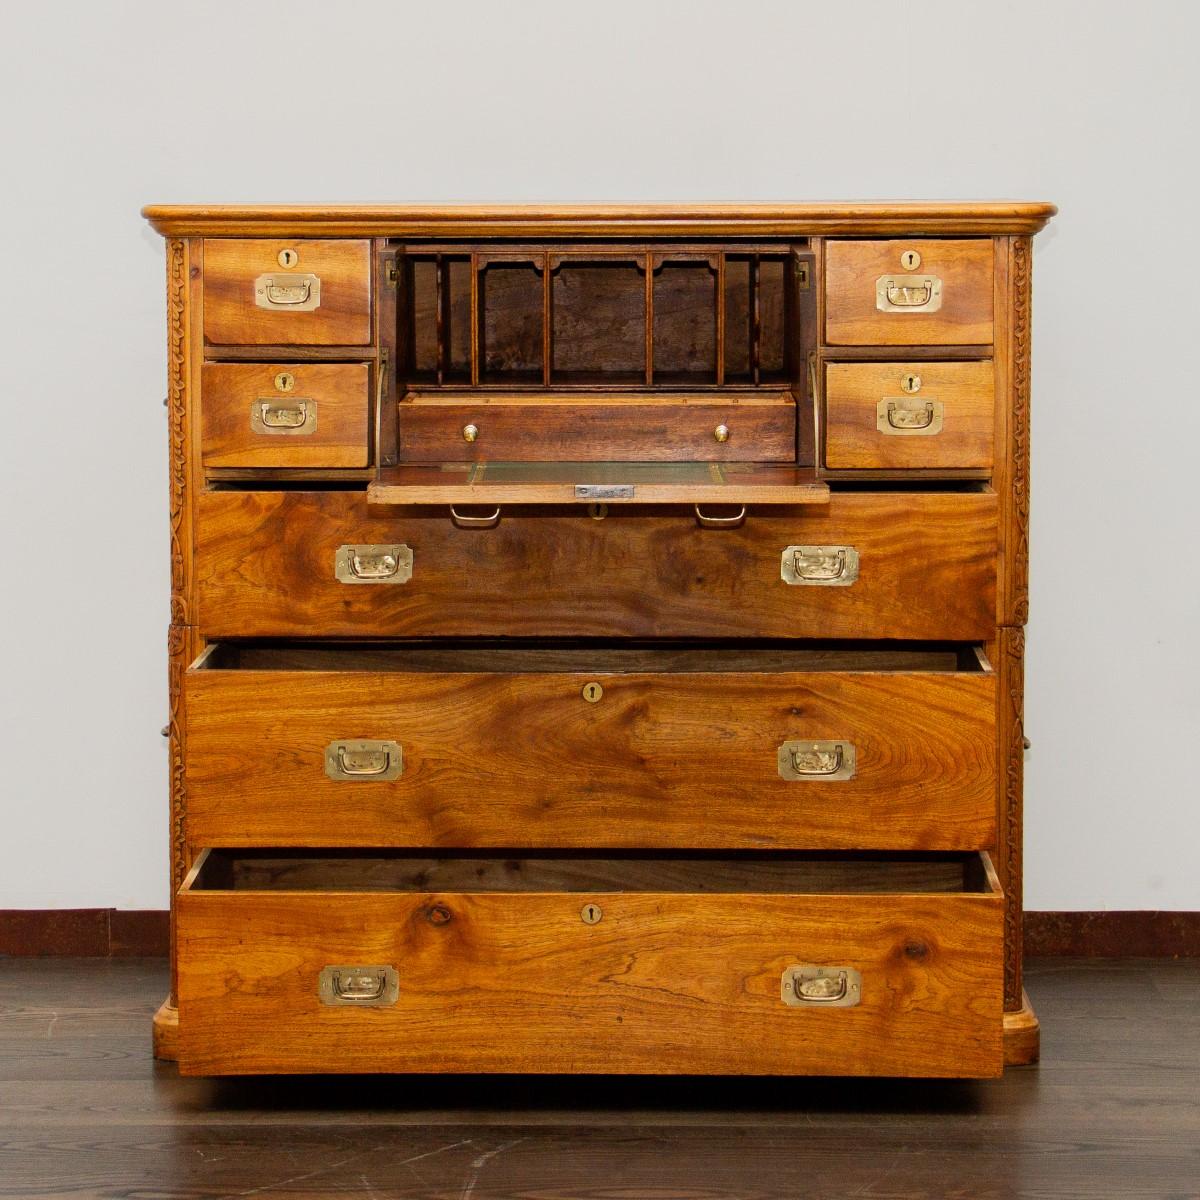 A 20th century camphor wood campaign secretaire chest. The bottom half has two large drawers with flush brass handles, whilst the top contains a single large drawer and four small drawers flanking a drop down desk, all with brass flush handles and